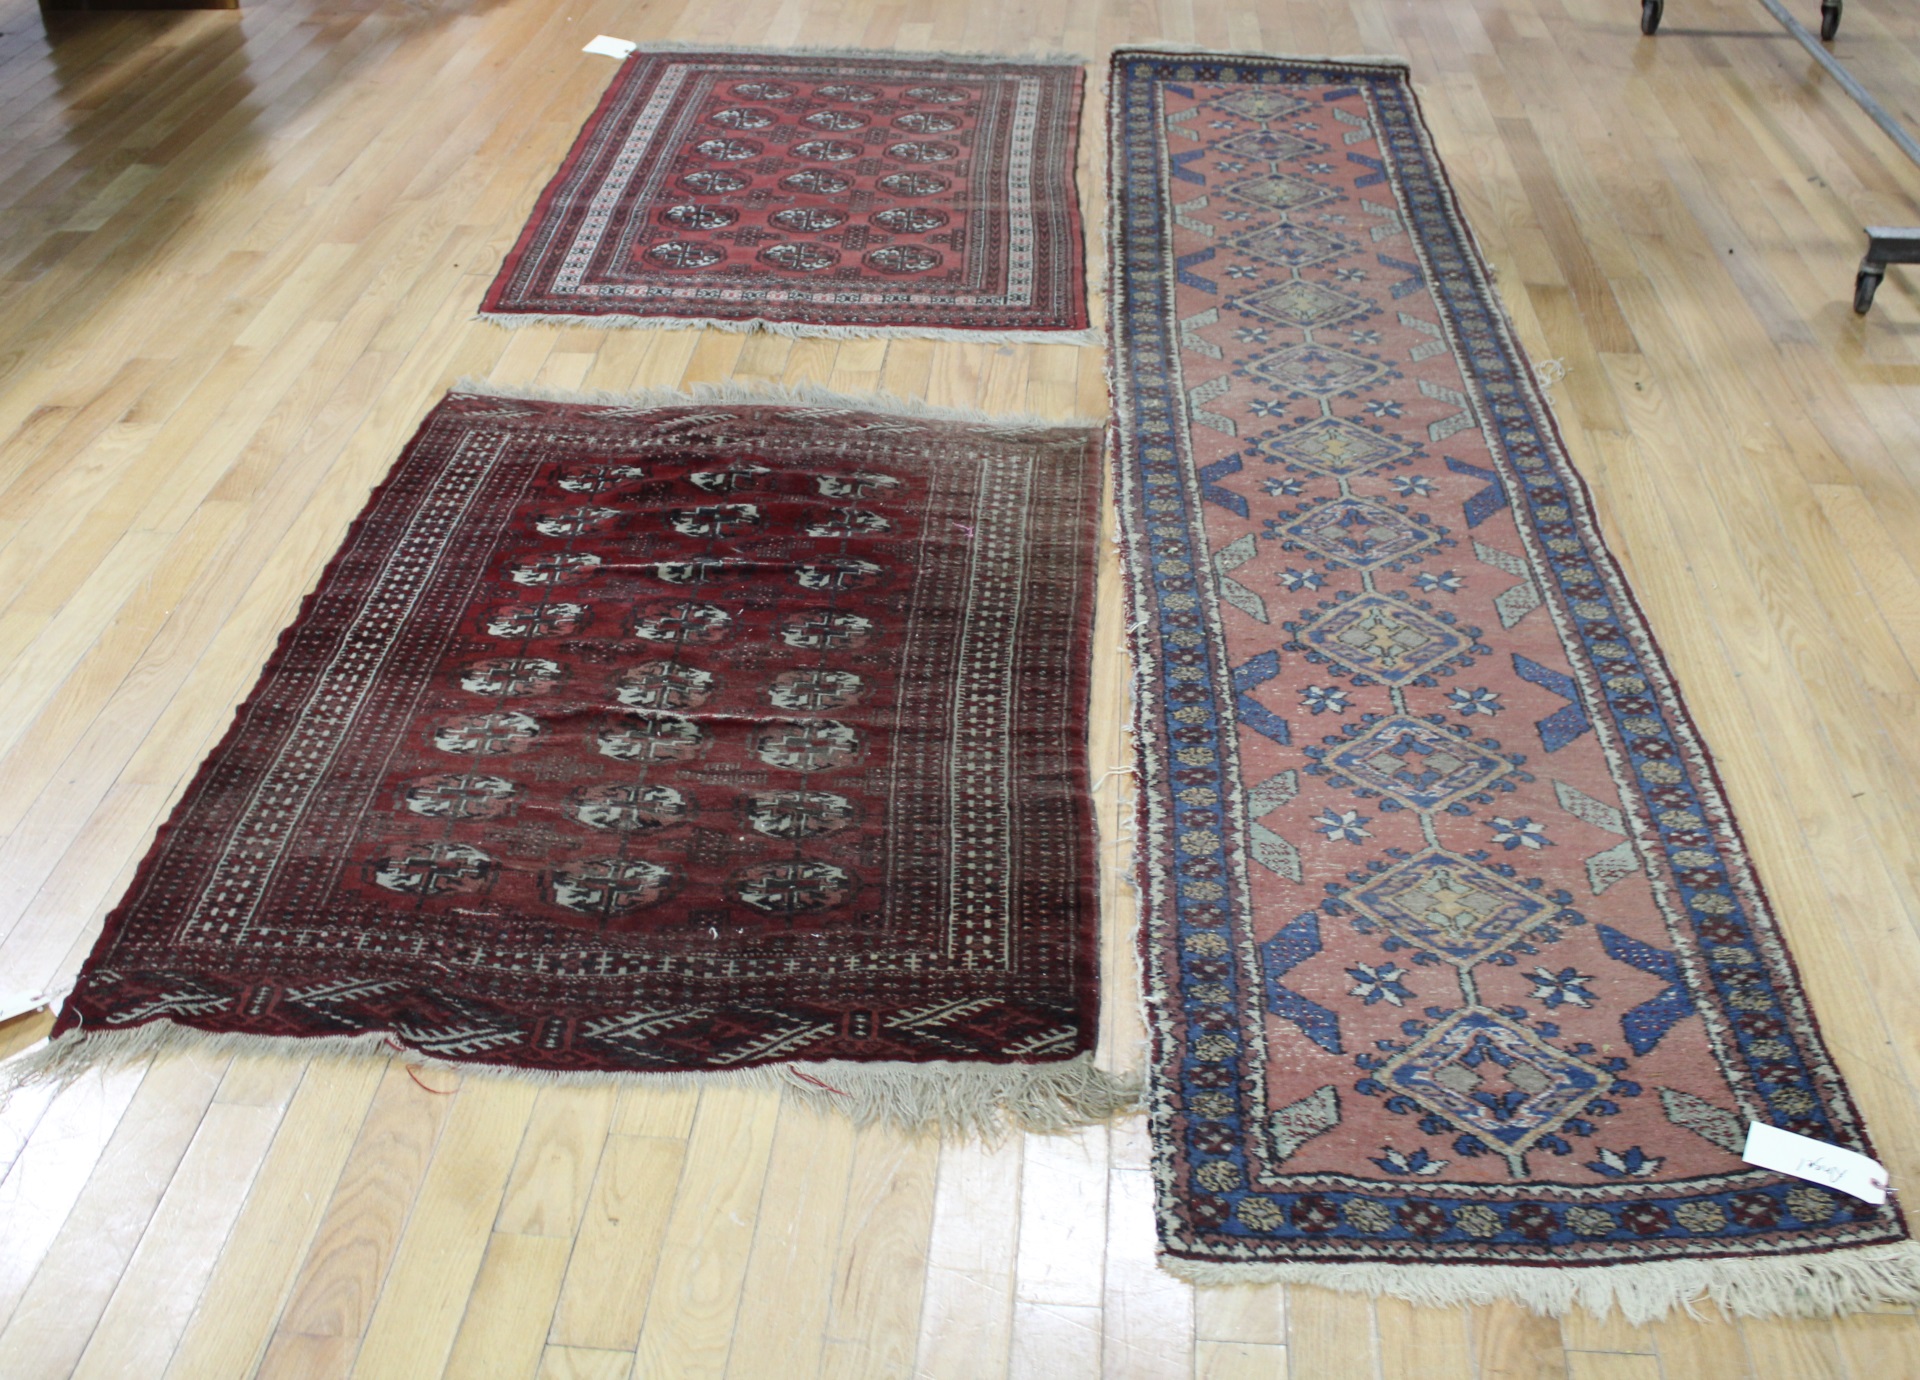 3 ANTIQUE AND FINELY HAND WOVEN 3baf83